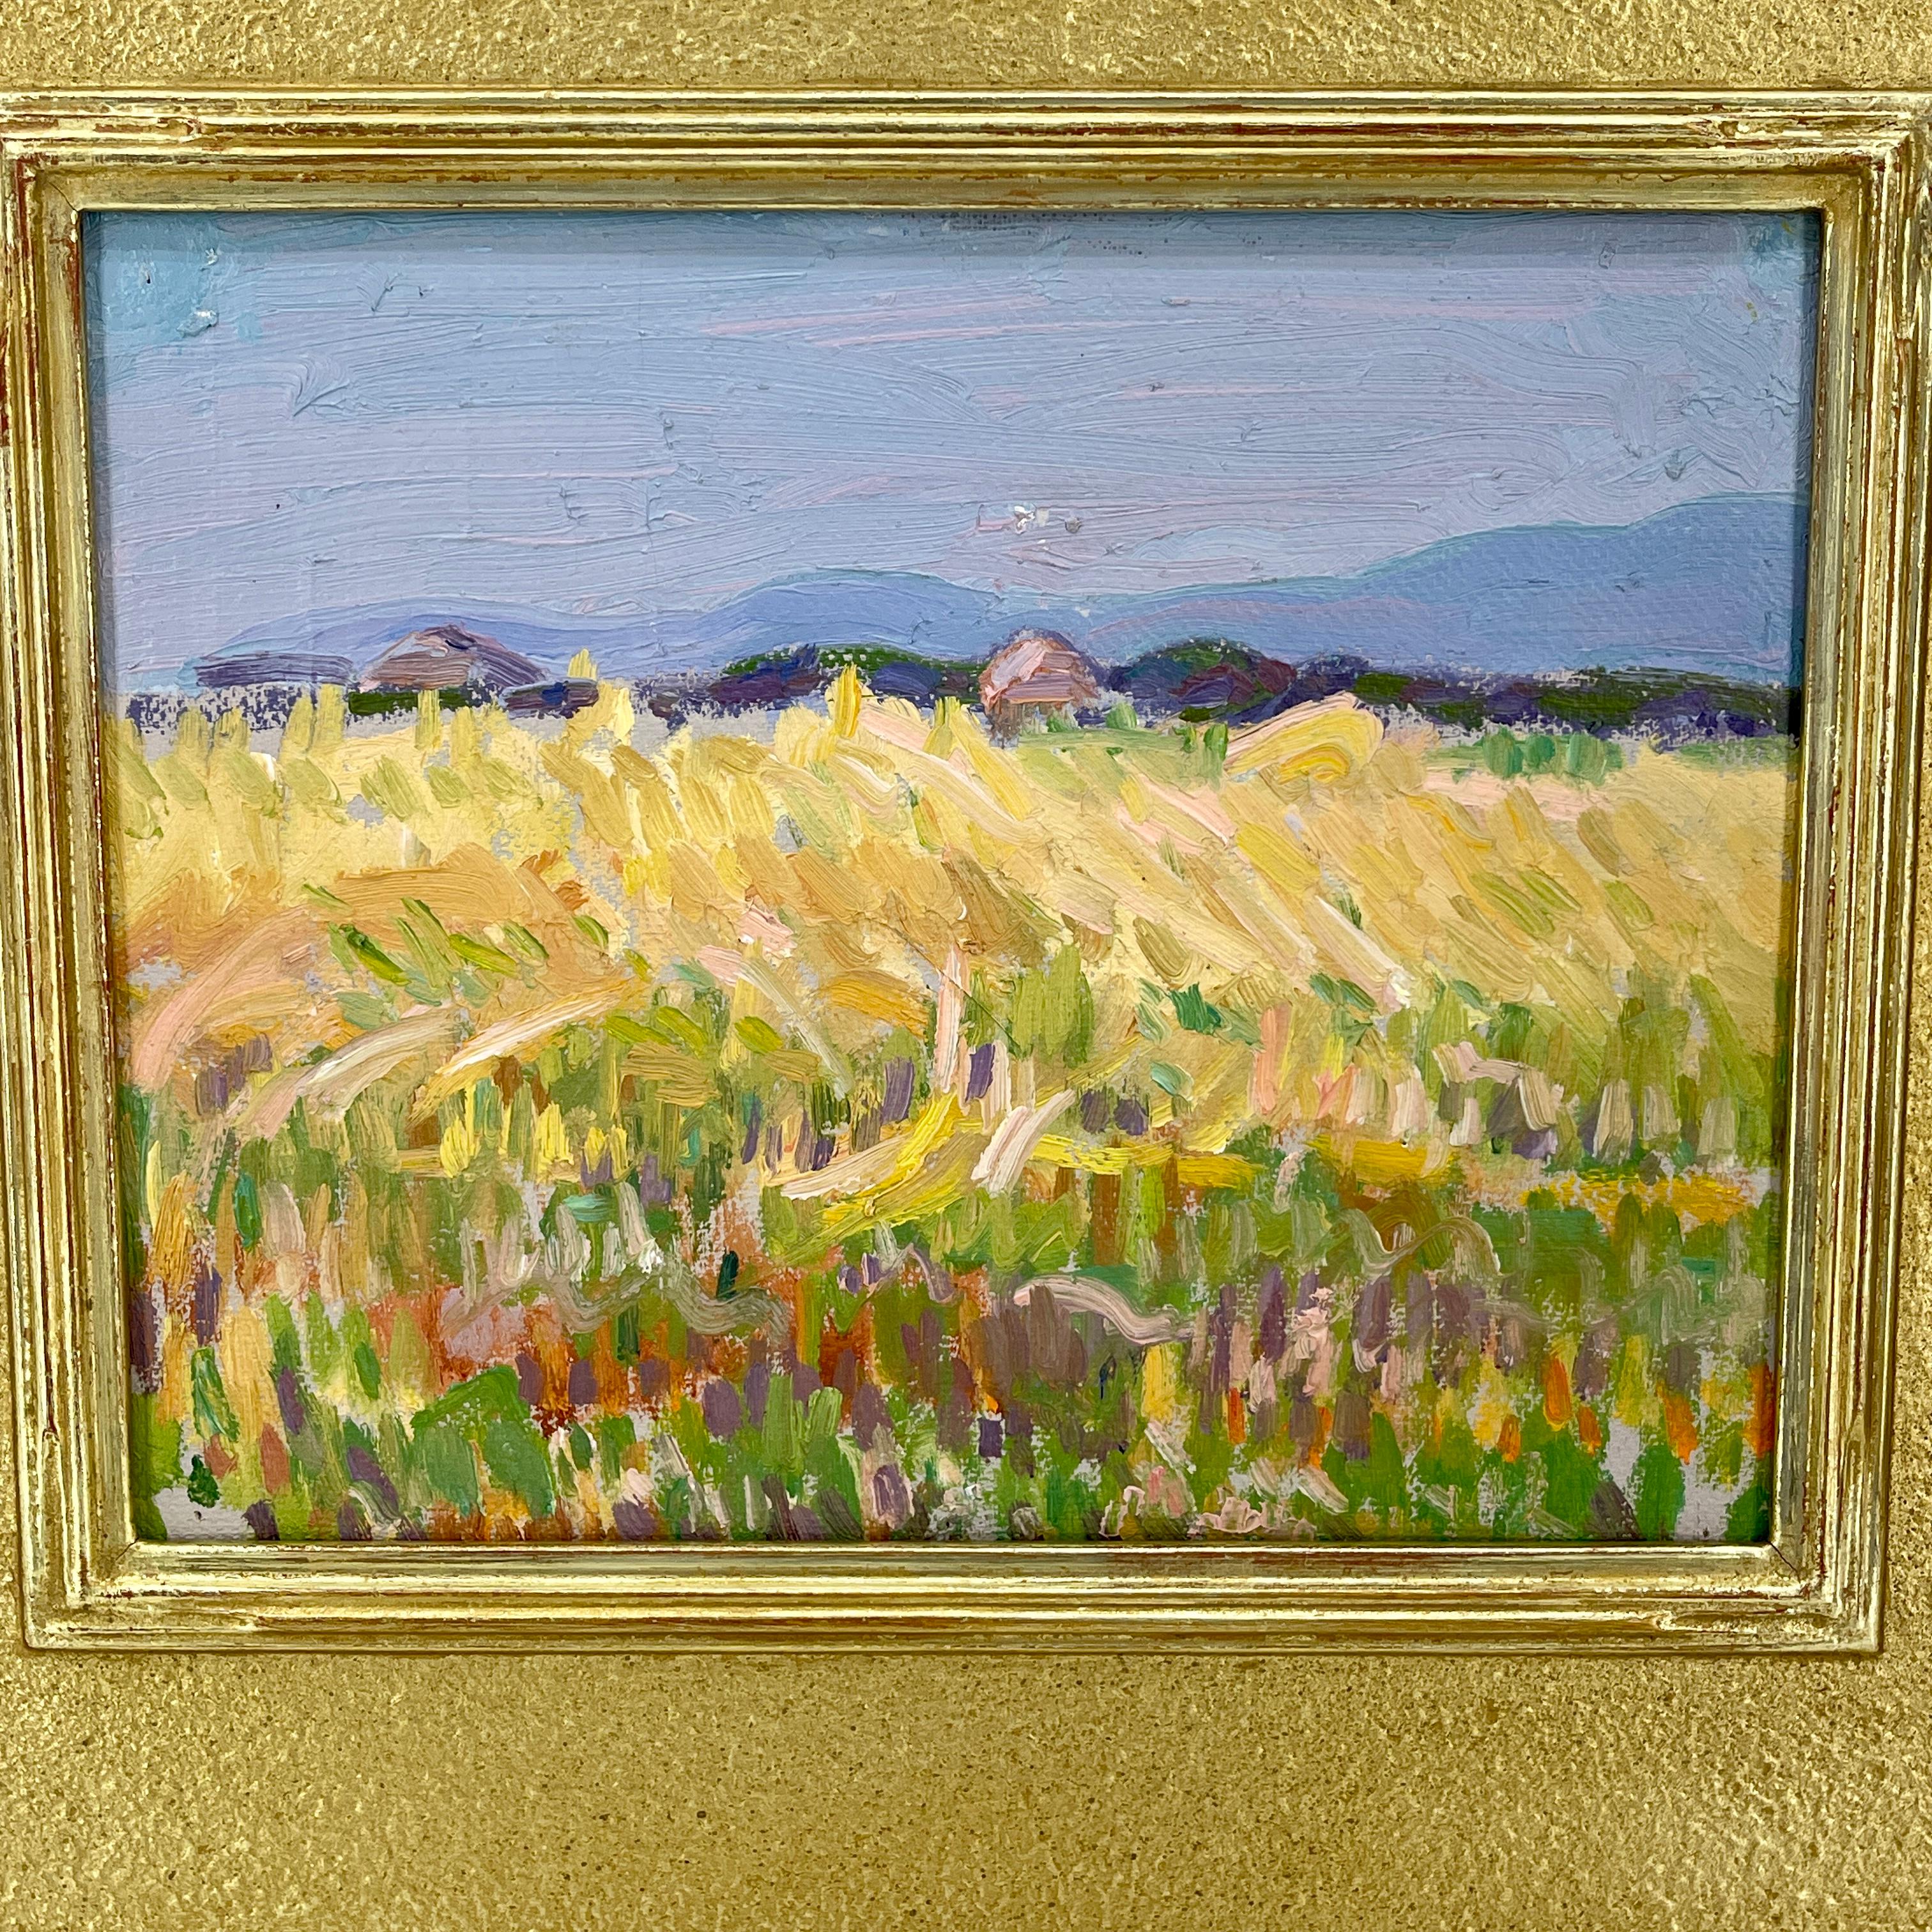 French Provincial French Impressionist Landscape Oil Painting With Haystacks, circa 1930's For Sale